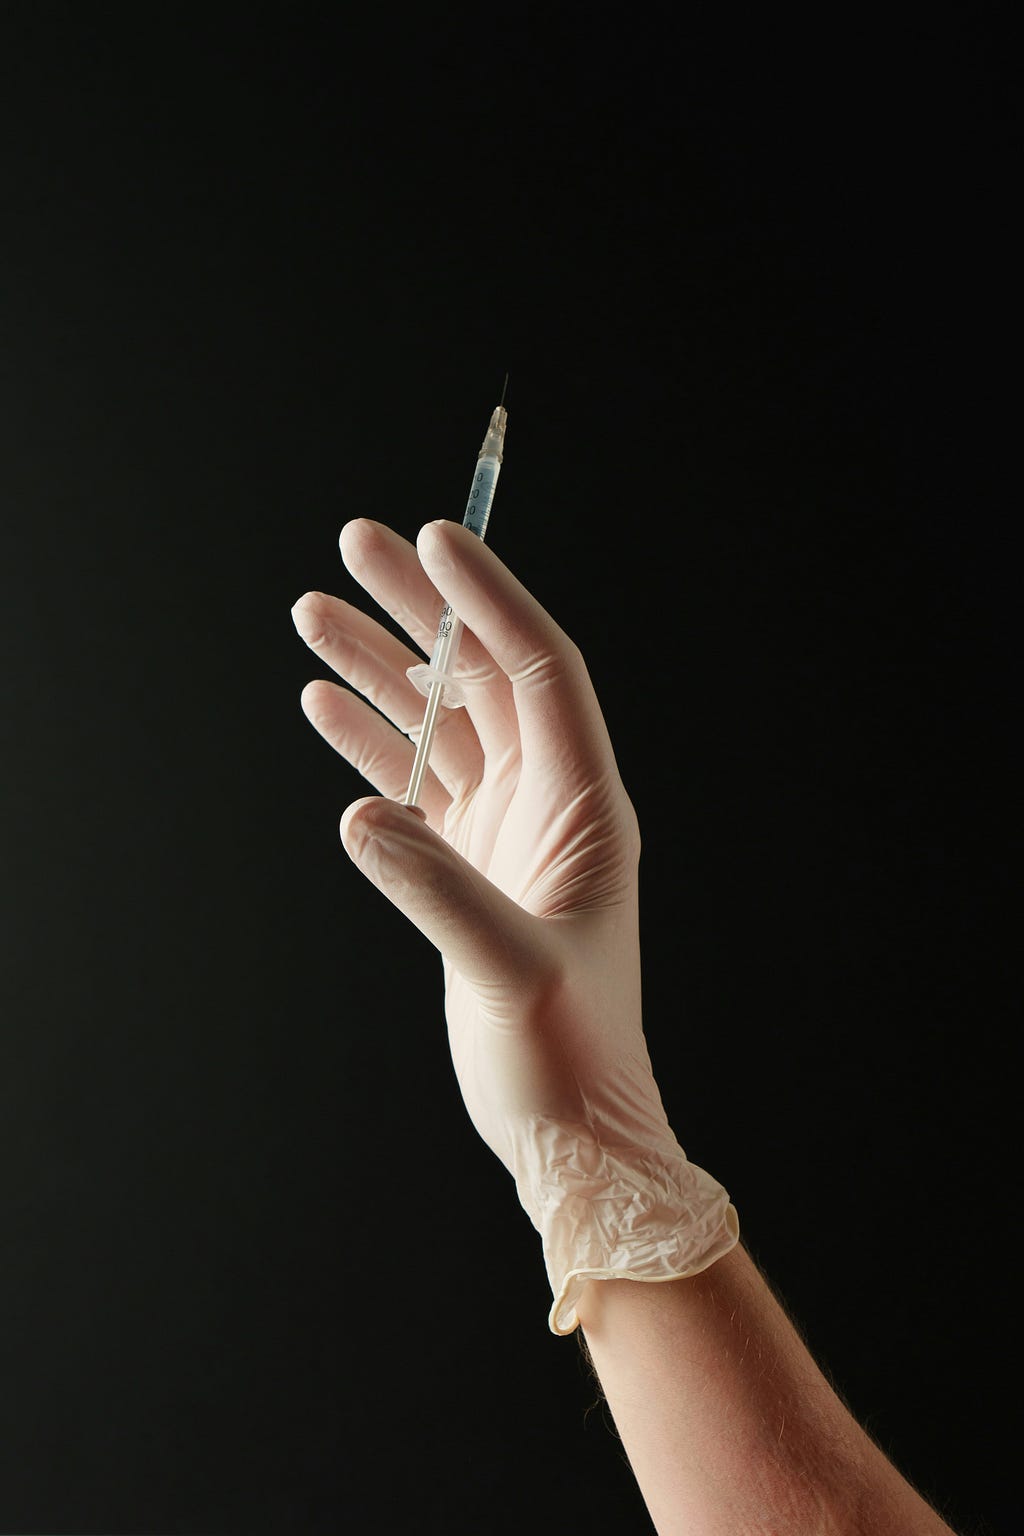 An image of a medical professional, syringe in hand, preparing to administer insulin on a potential patient.